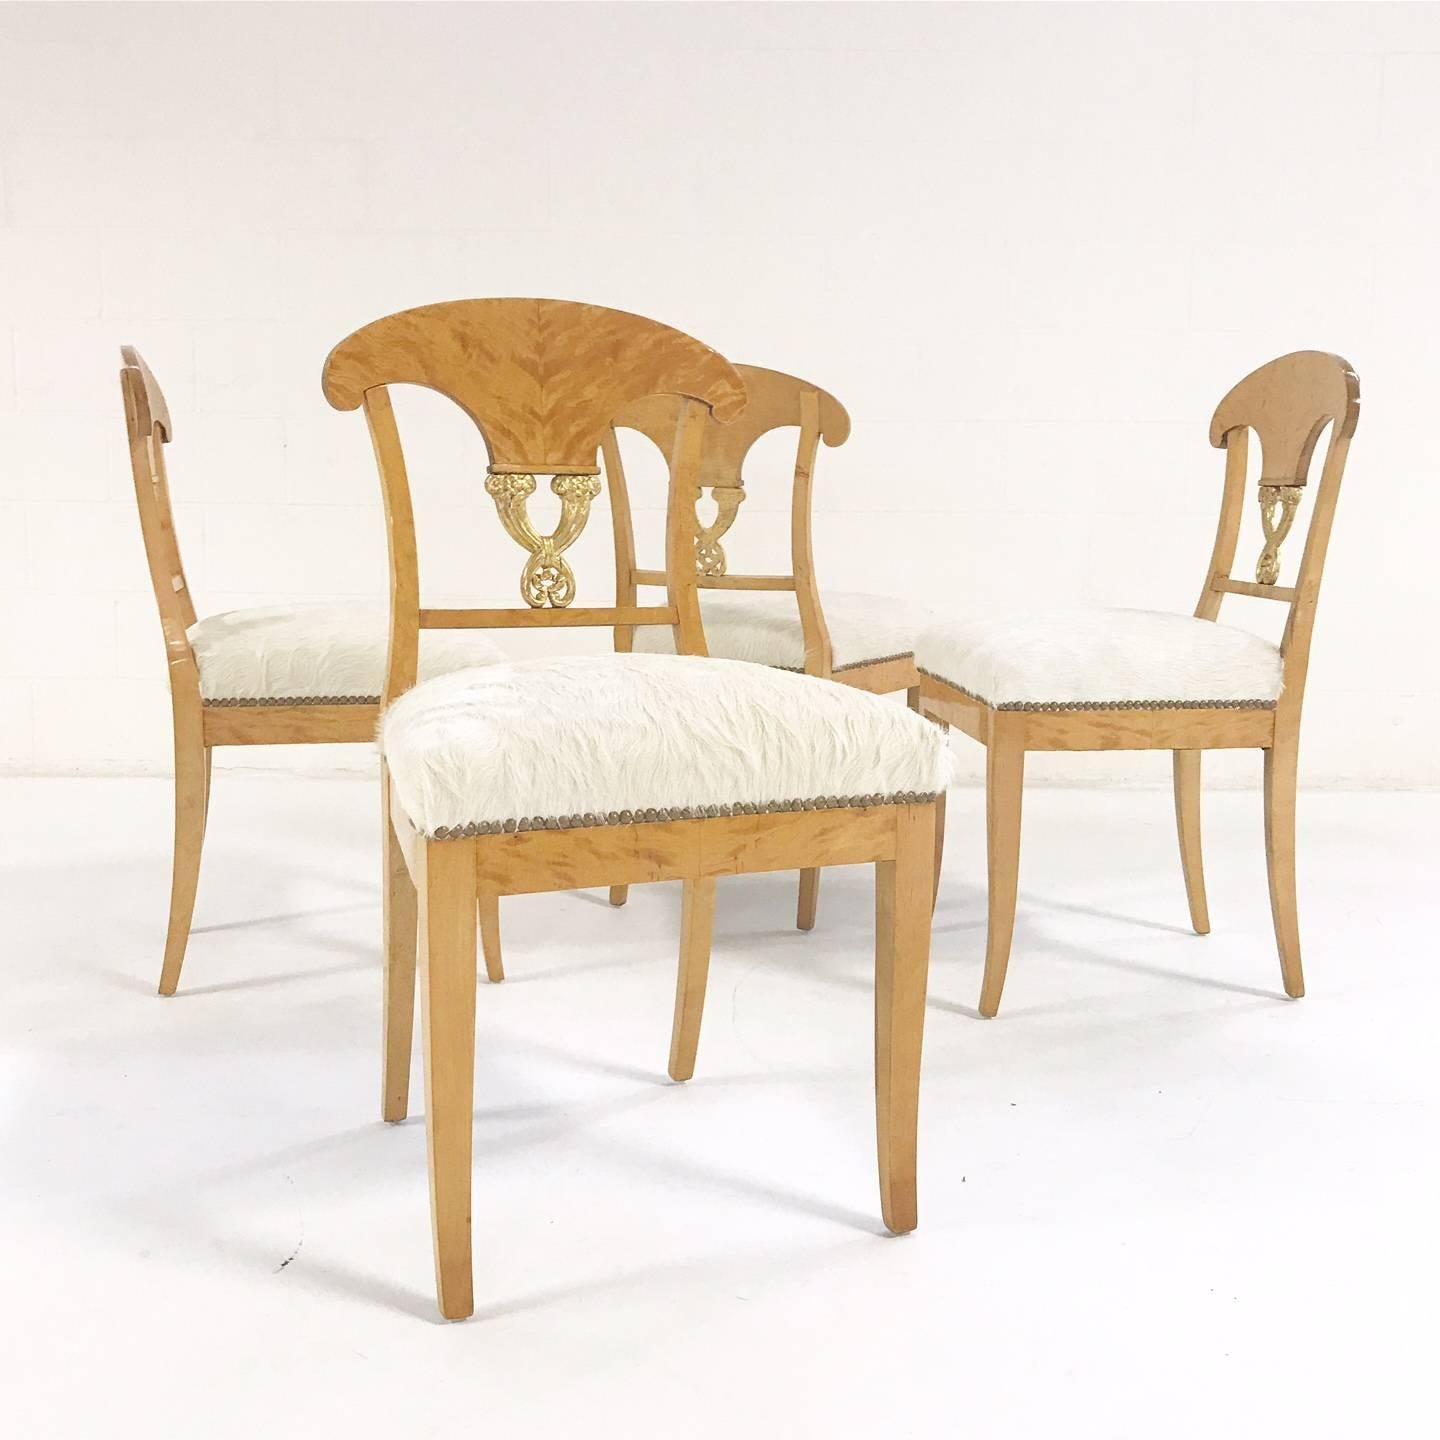 This is a lovely set of four Biedermeier chairs, circa 1820 Austria. We love the blond satin birch and the gilt details. We restored each chair with new foam and upholstered in our natural, silky soft ivory Brazilian cowhide.

Measure: 18